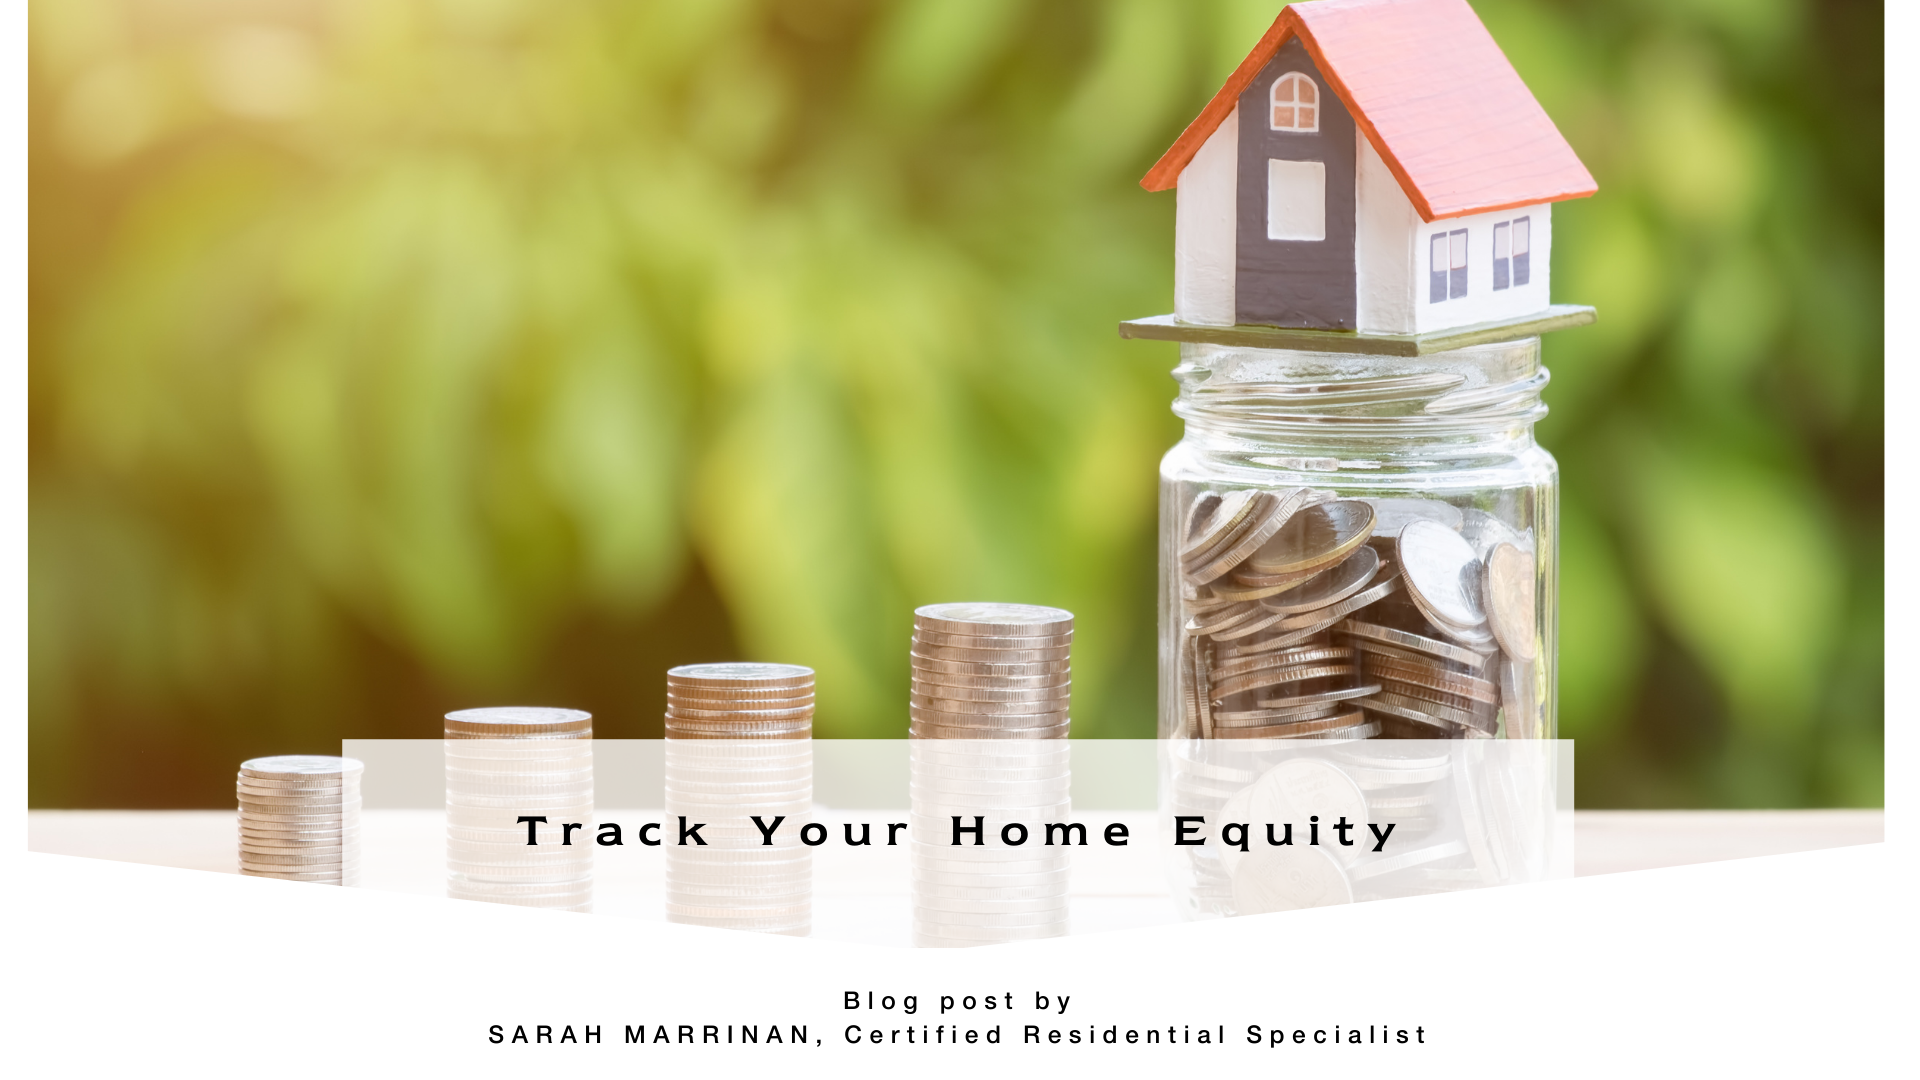 Track Your Home Equity